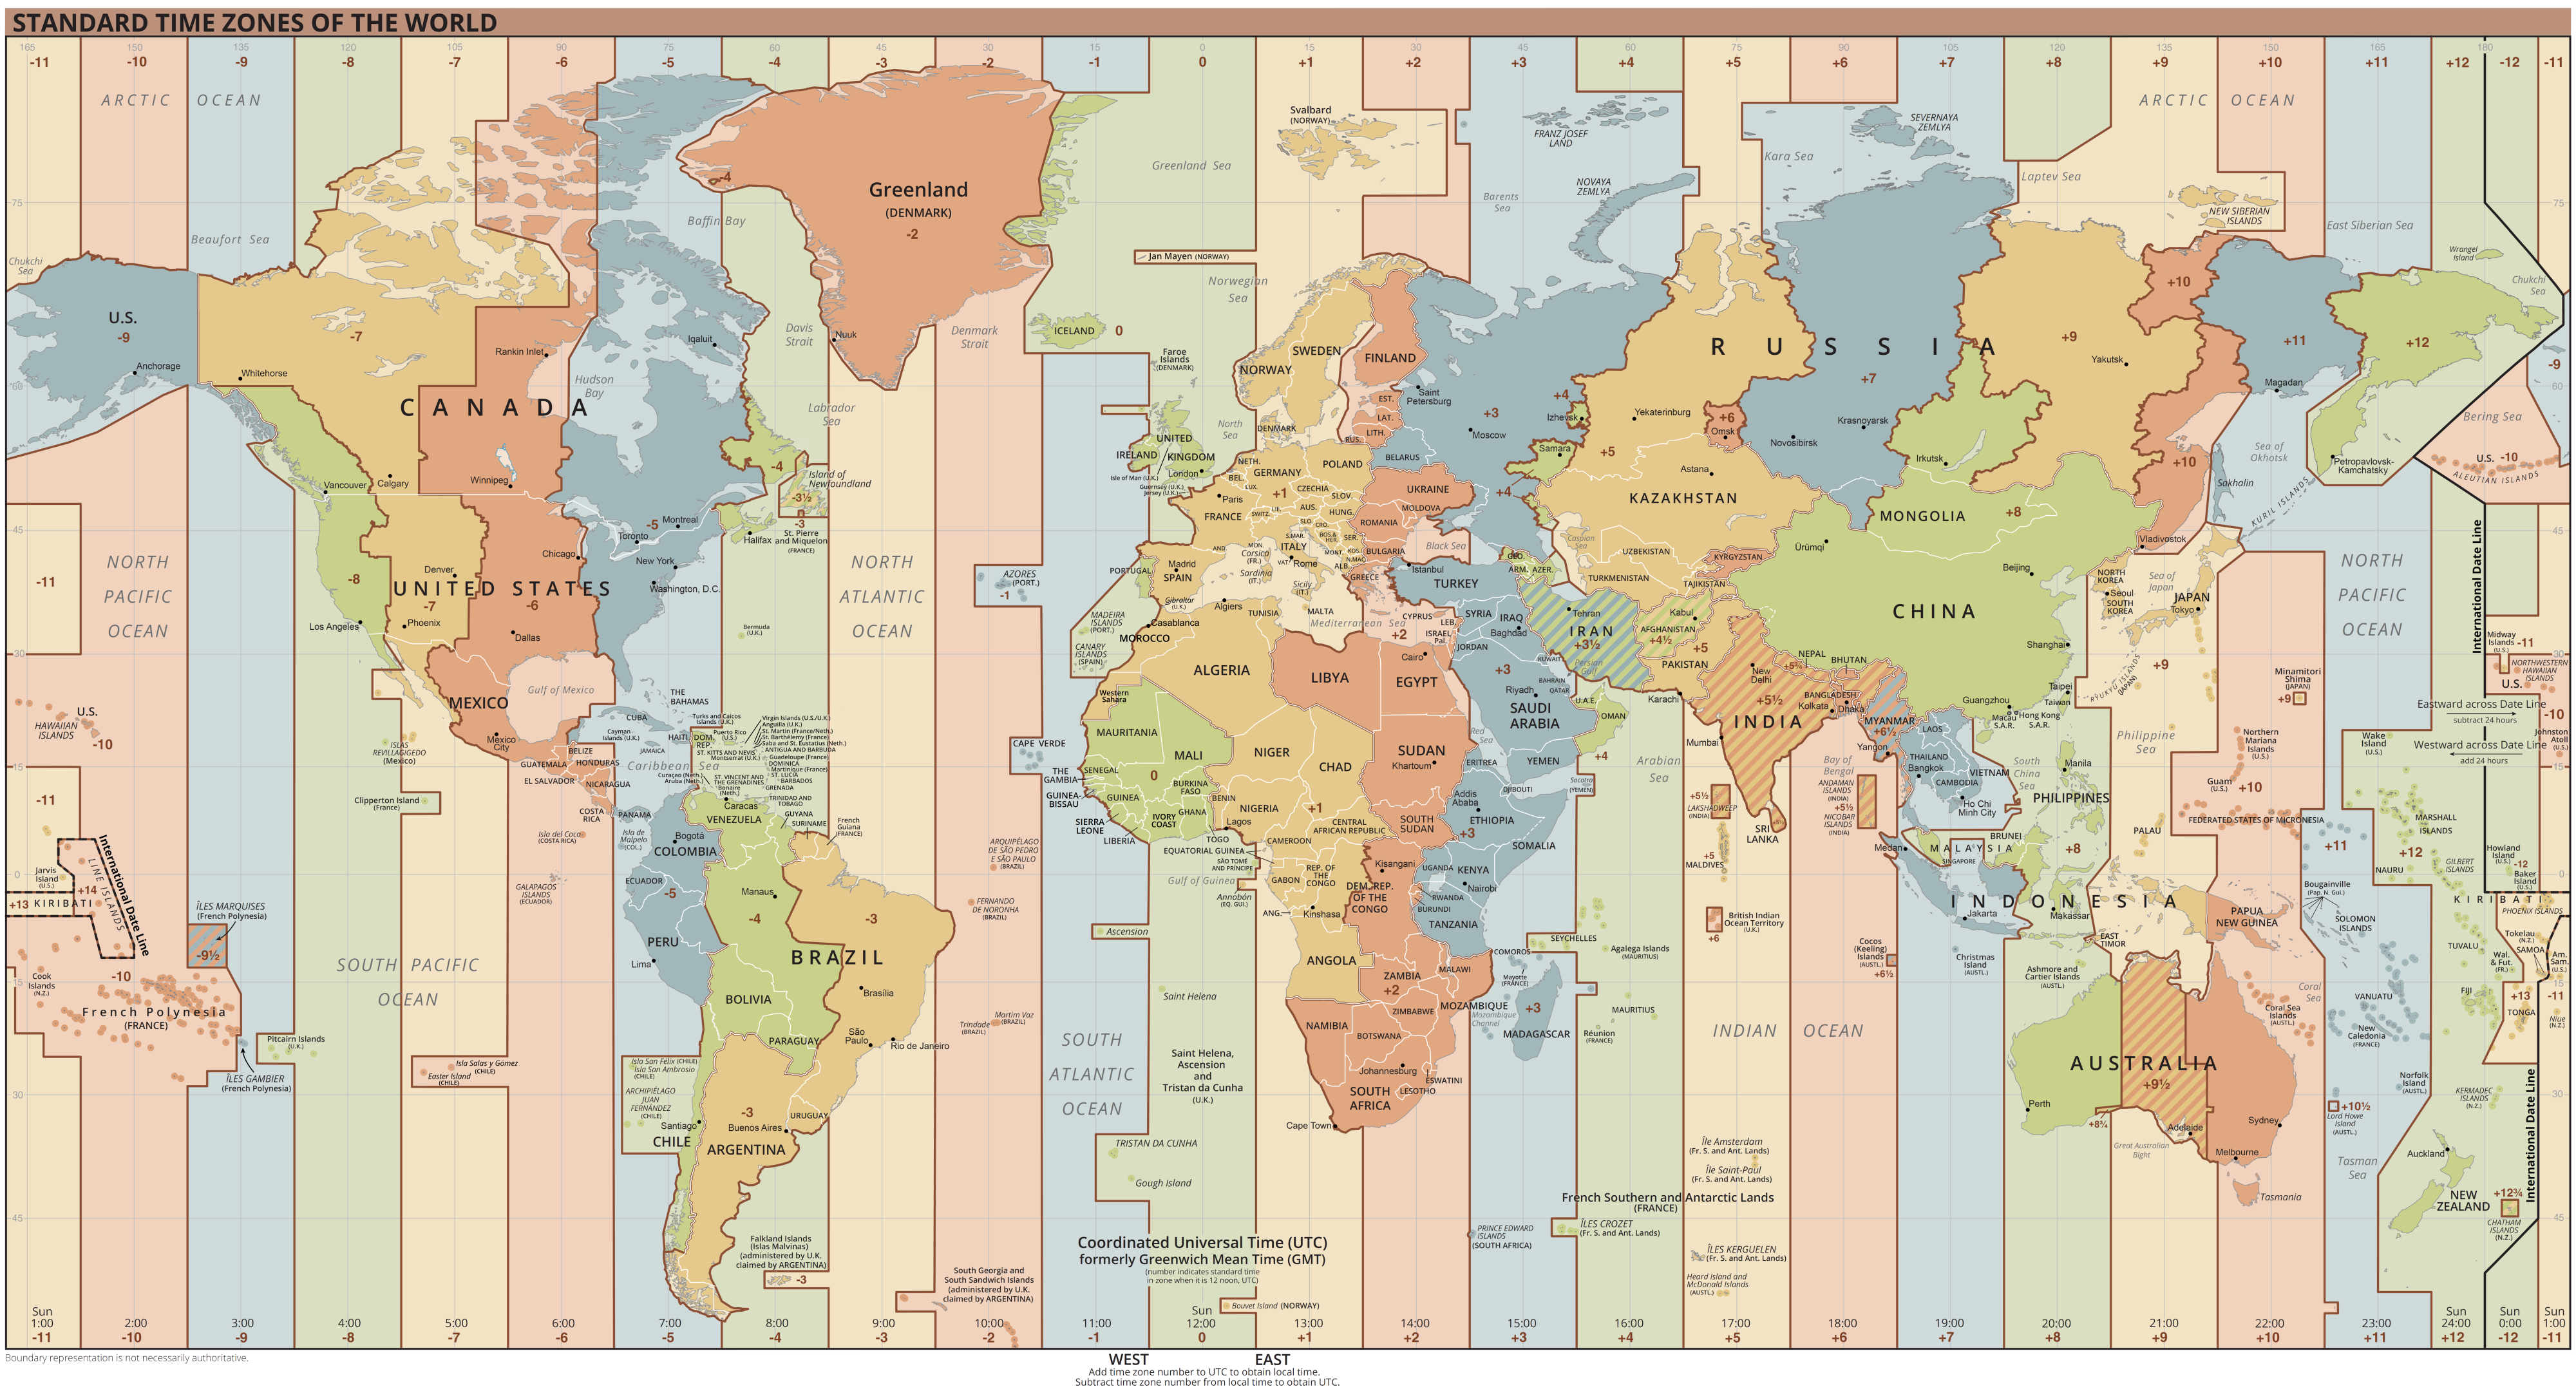 World_Time_Zones_Map.png